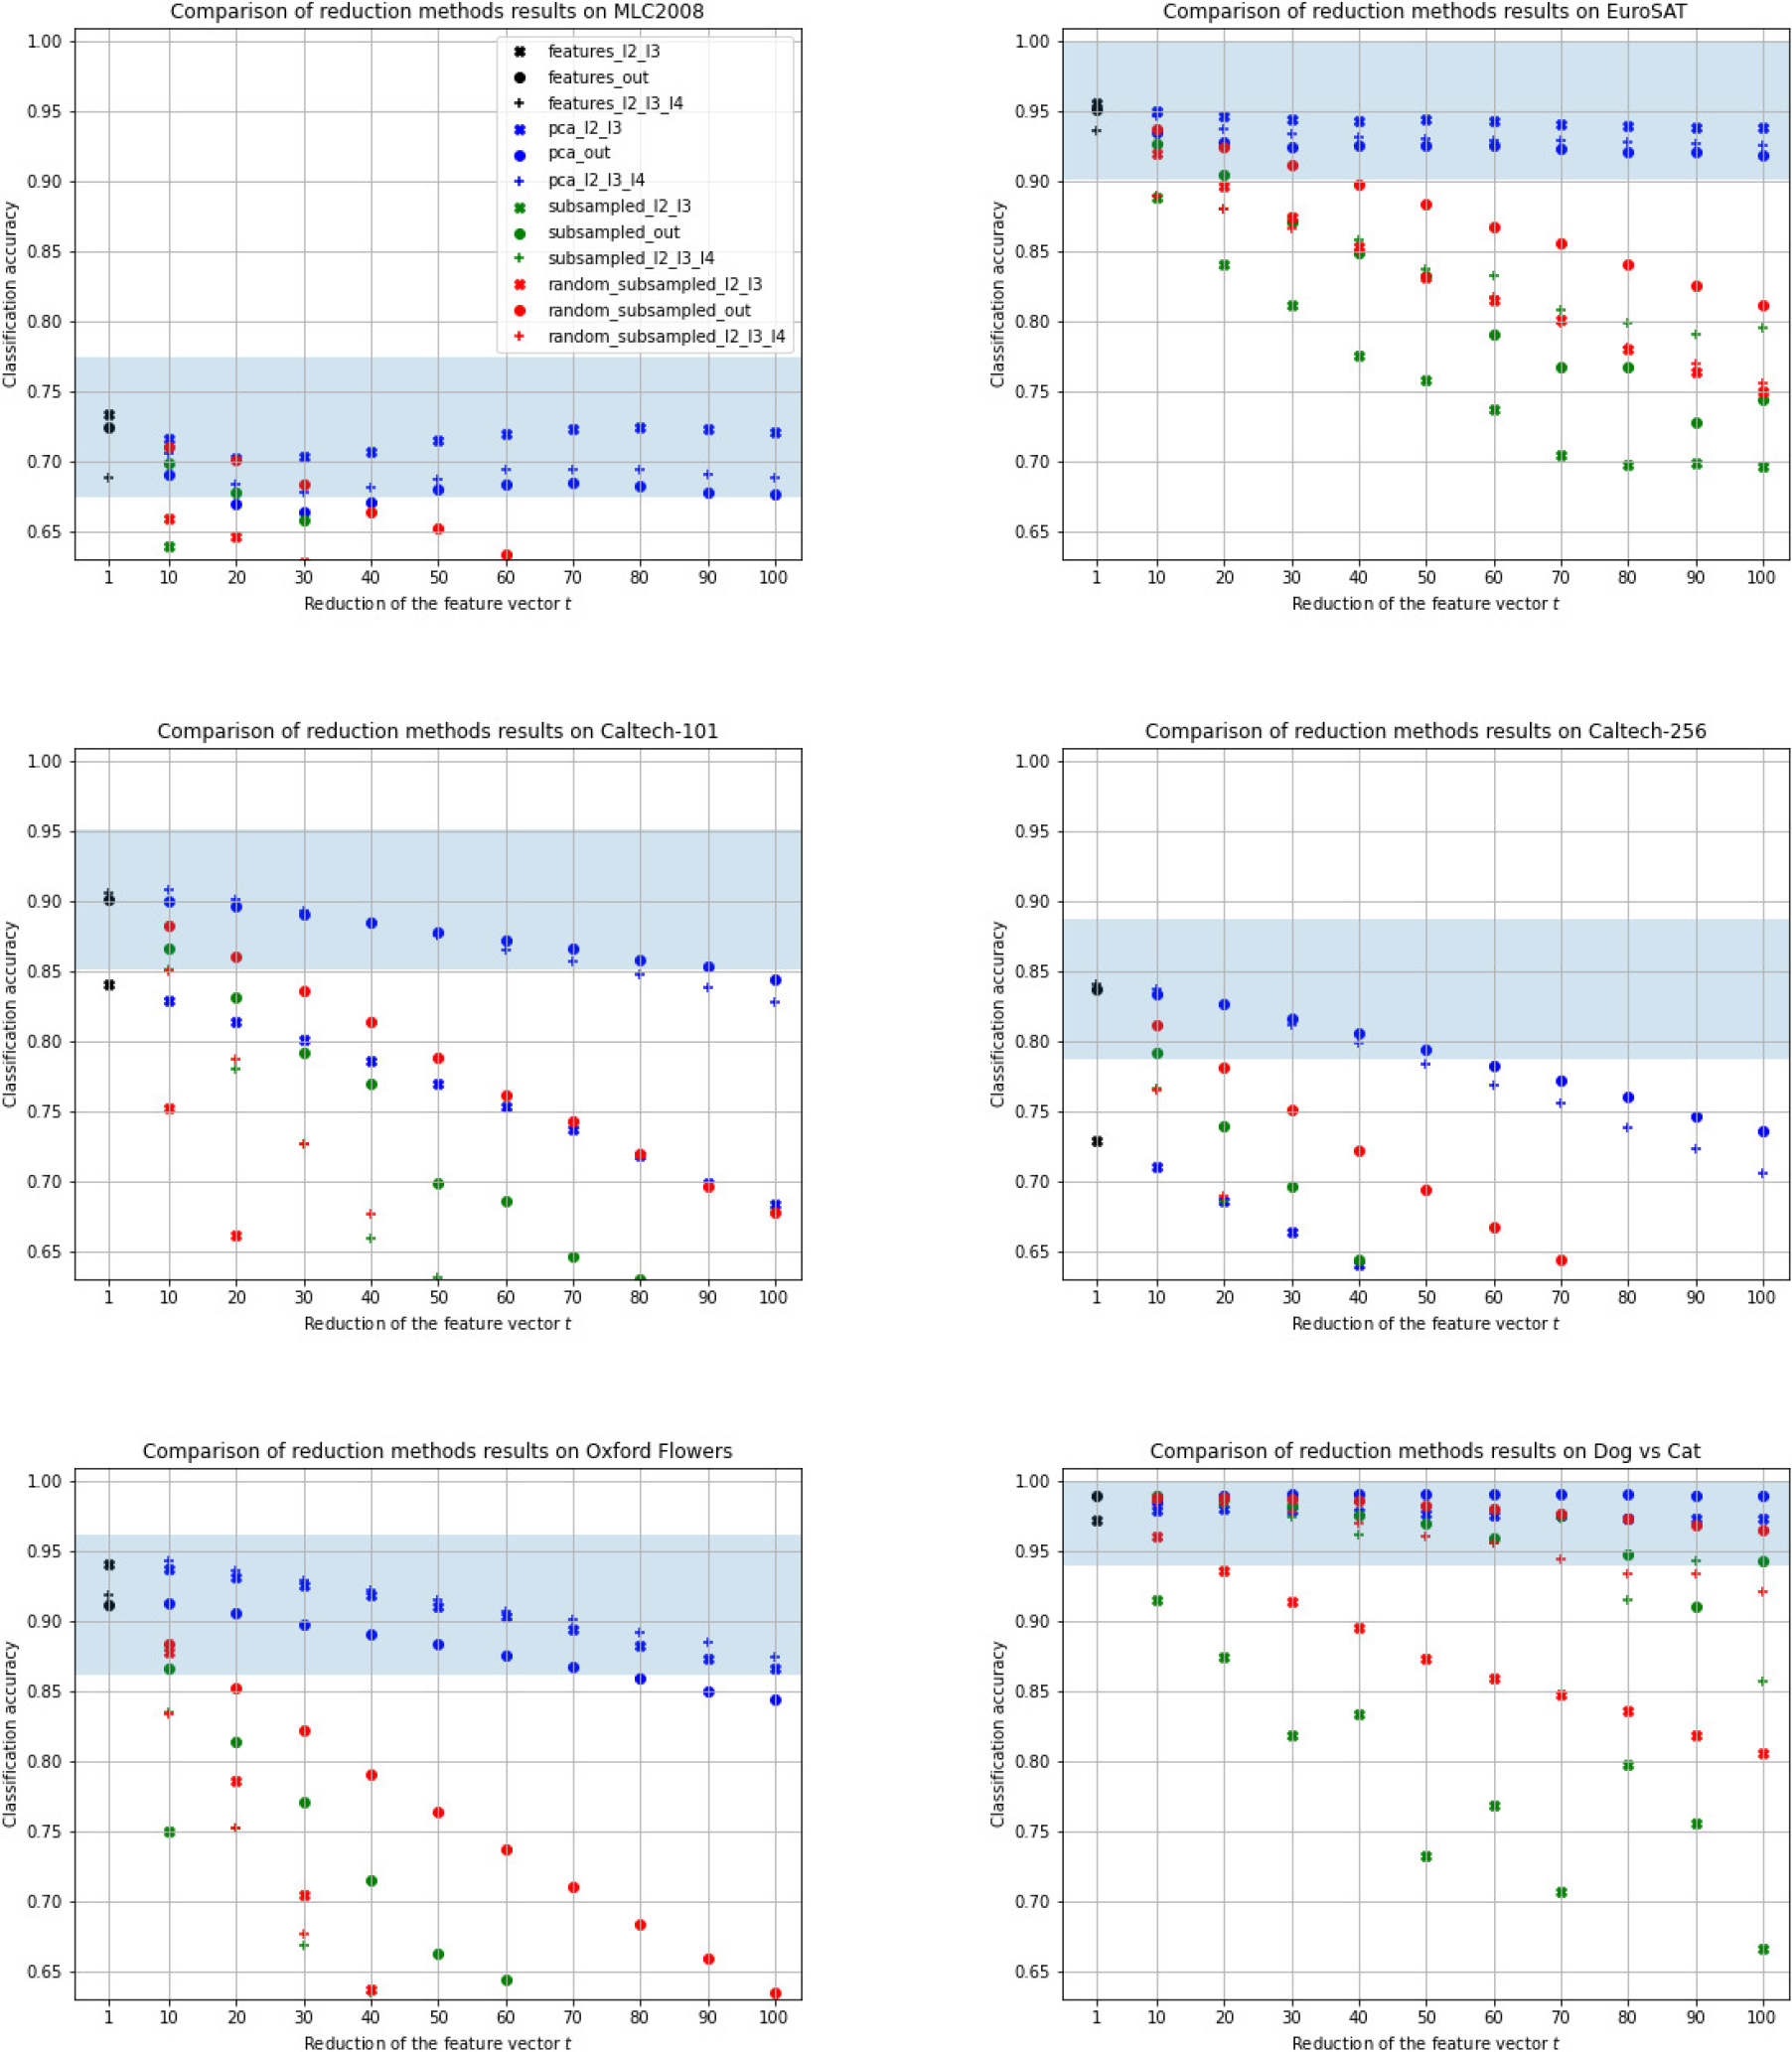 A comparison of classification results on various datasets depending on the dimensionality reduction factor t for different feature vectors (various symbols). The black color indicates the result obtained for the base ResFeats, blue after applying PCA, green as a result of taking every t-th component, and red as a result of randomly selecting the t-th part of the coordinates of the feature vector. The legend is common to all charts.